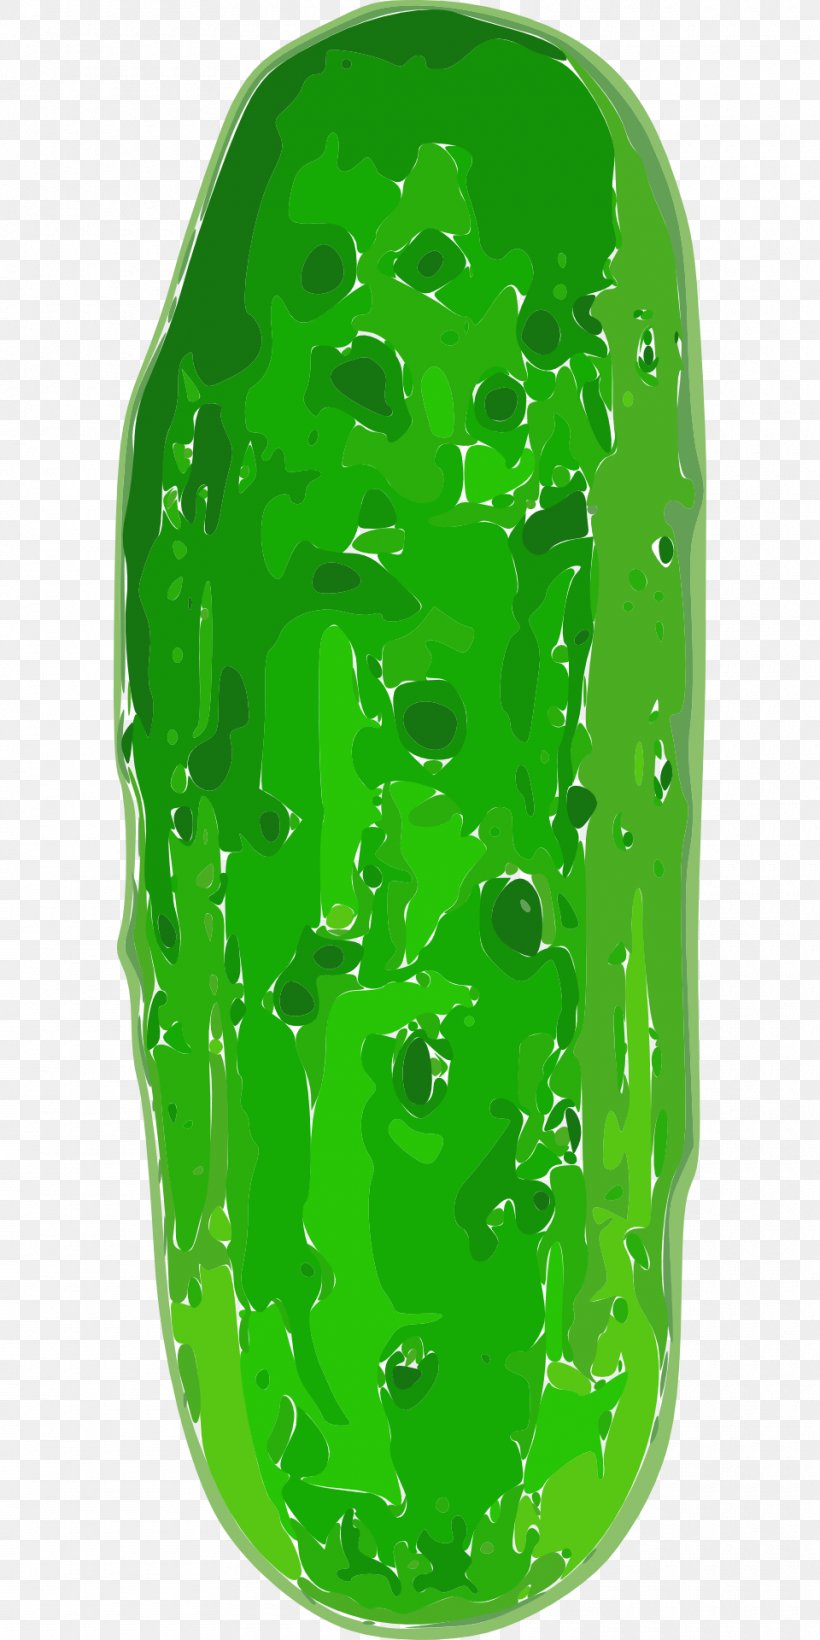 Pickled Cucumber Clip Art, PNG, 960x1920px, Pickled Cucumber, Cucumber, Green, Pickling, Spread Download Free